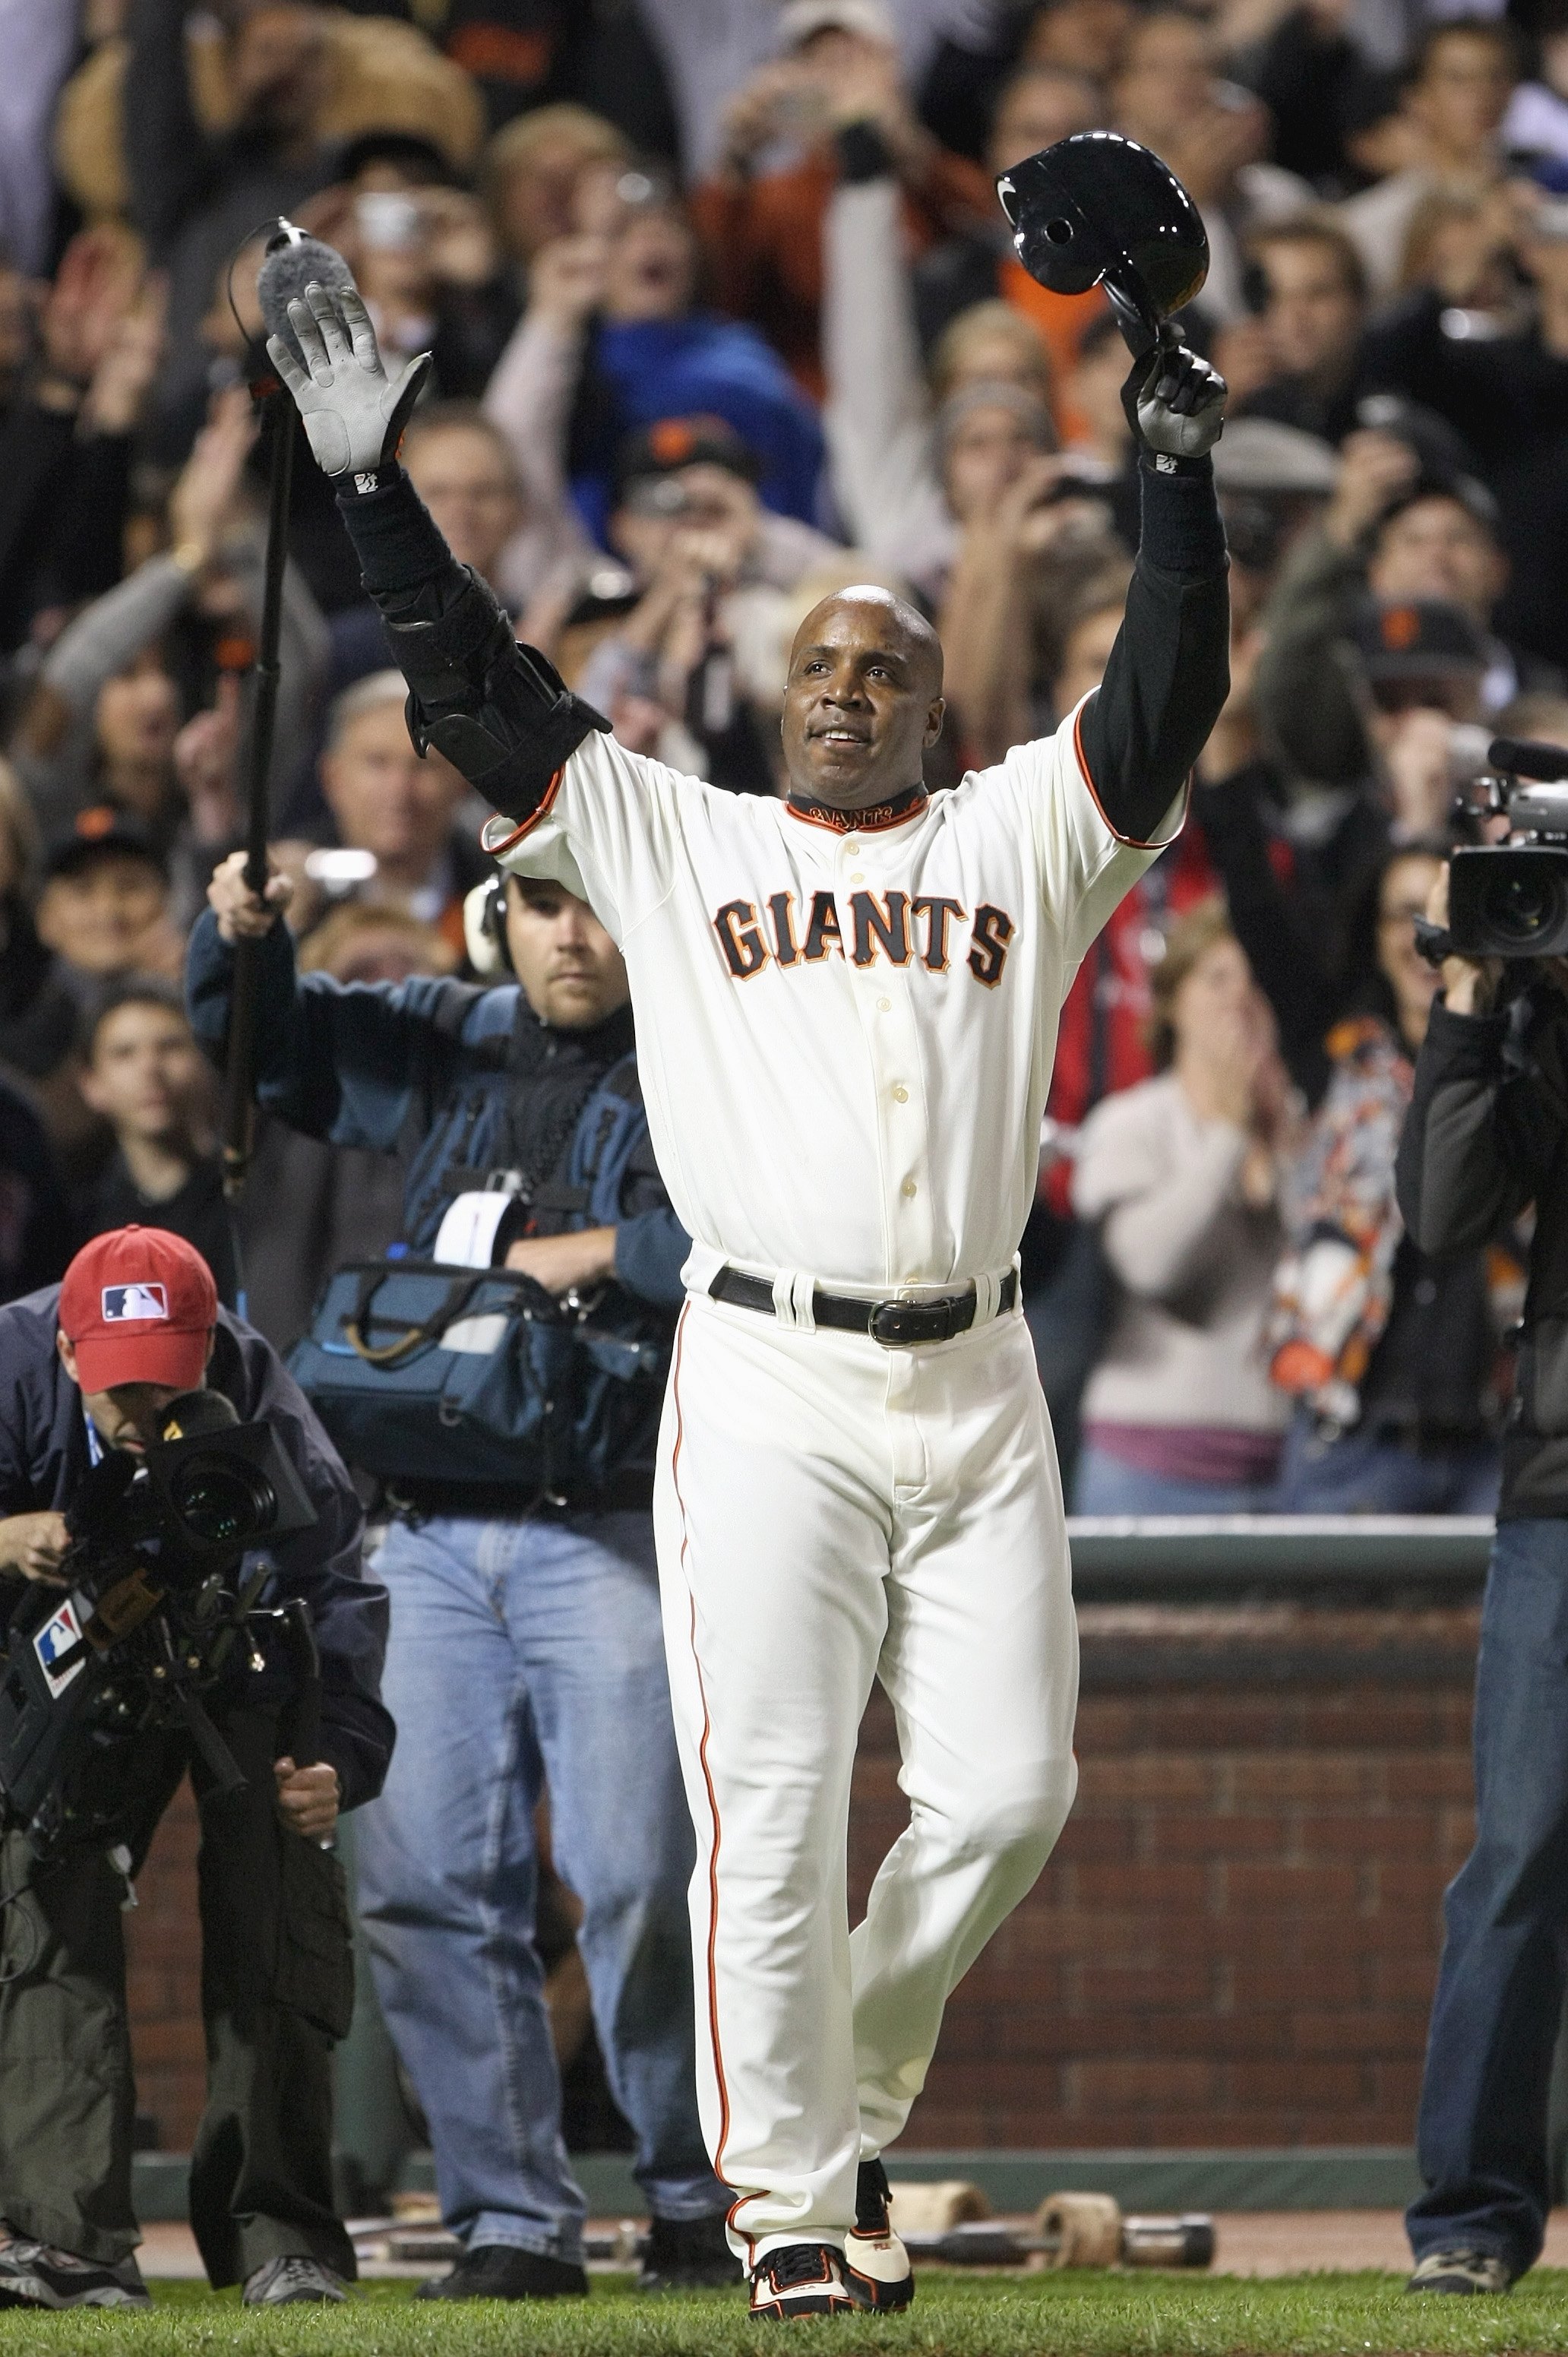 SAN FRANCISCO - AUGUST 07: Barry Bonds #25 of the San Francisco Giants raises his fists after hitting career home run #756 against Mike Bacsik of the Washington Nationals on August 7, 2007 at AT&T Park in San Francisco, California. With his 756th career h